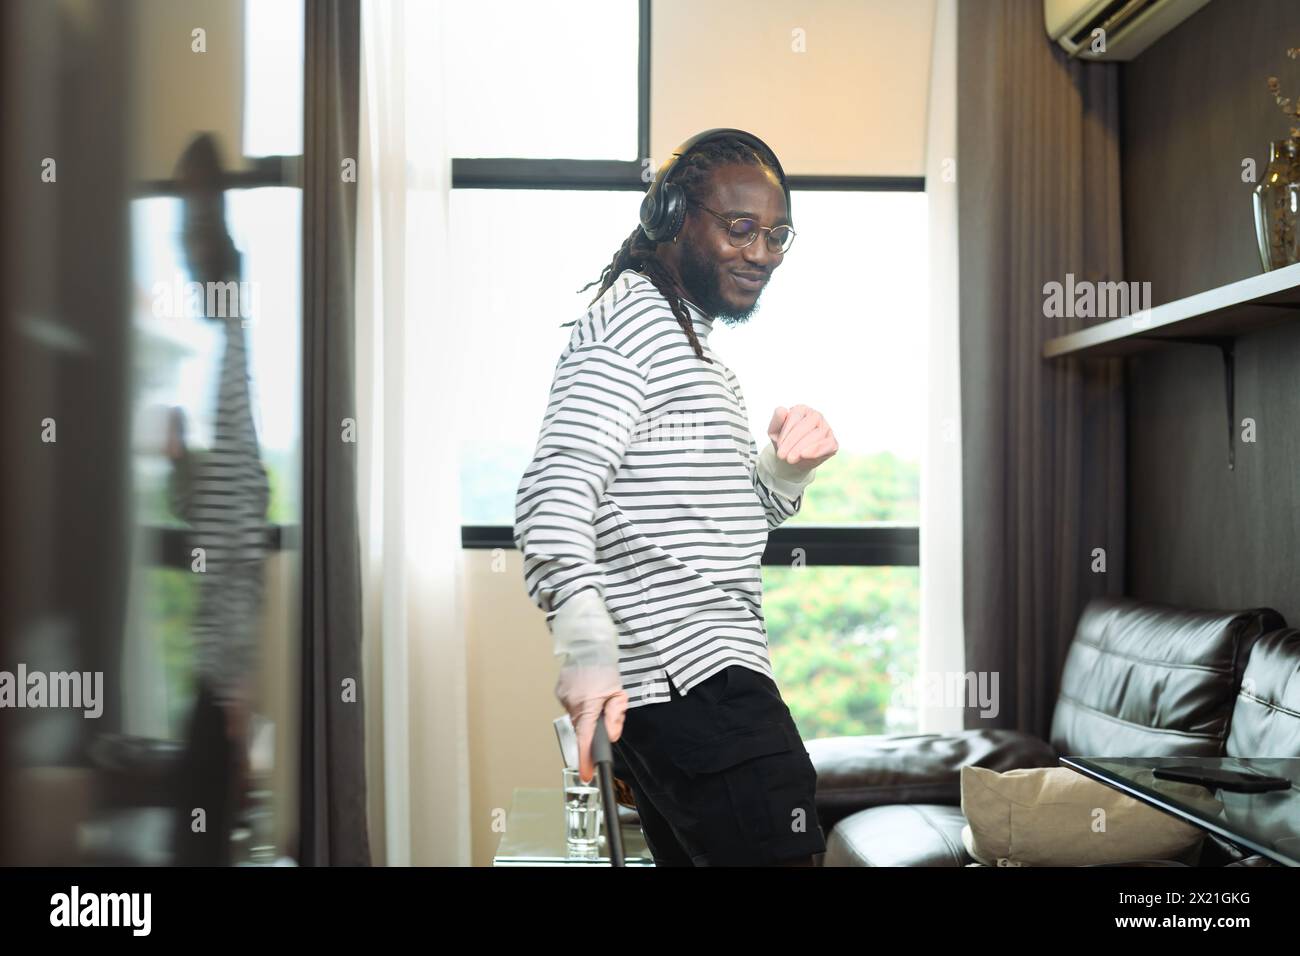 Carefree happy young African man listening to music in headphones, enjoying housework Stock Photo